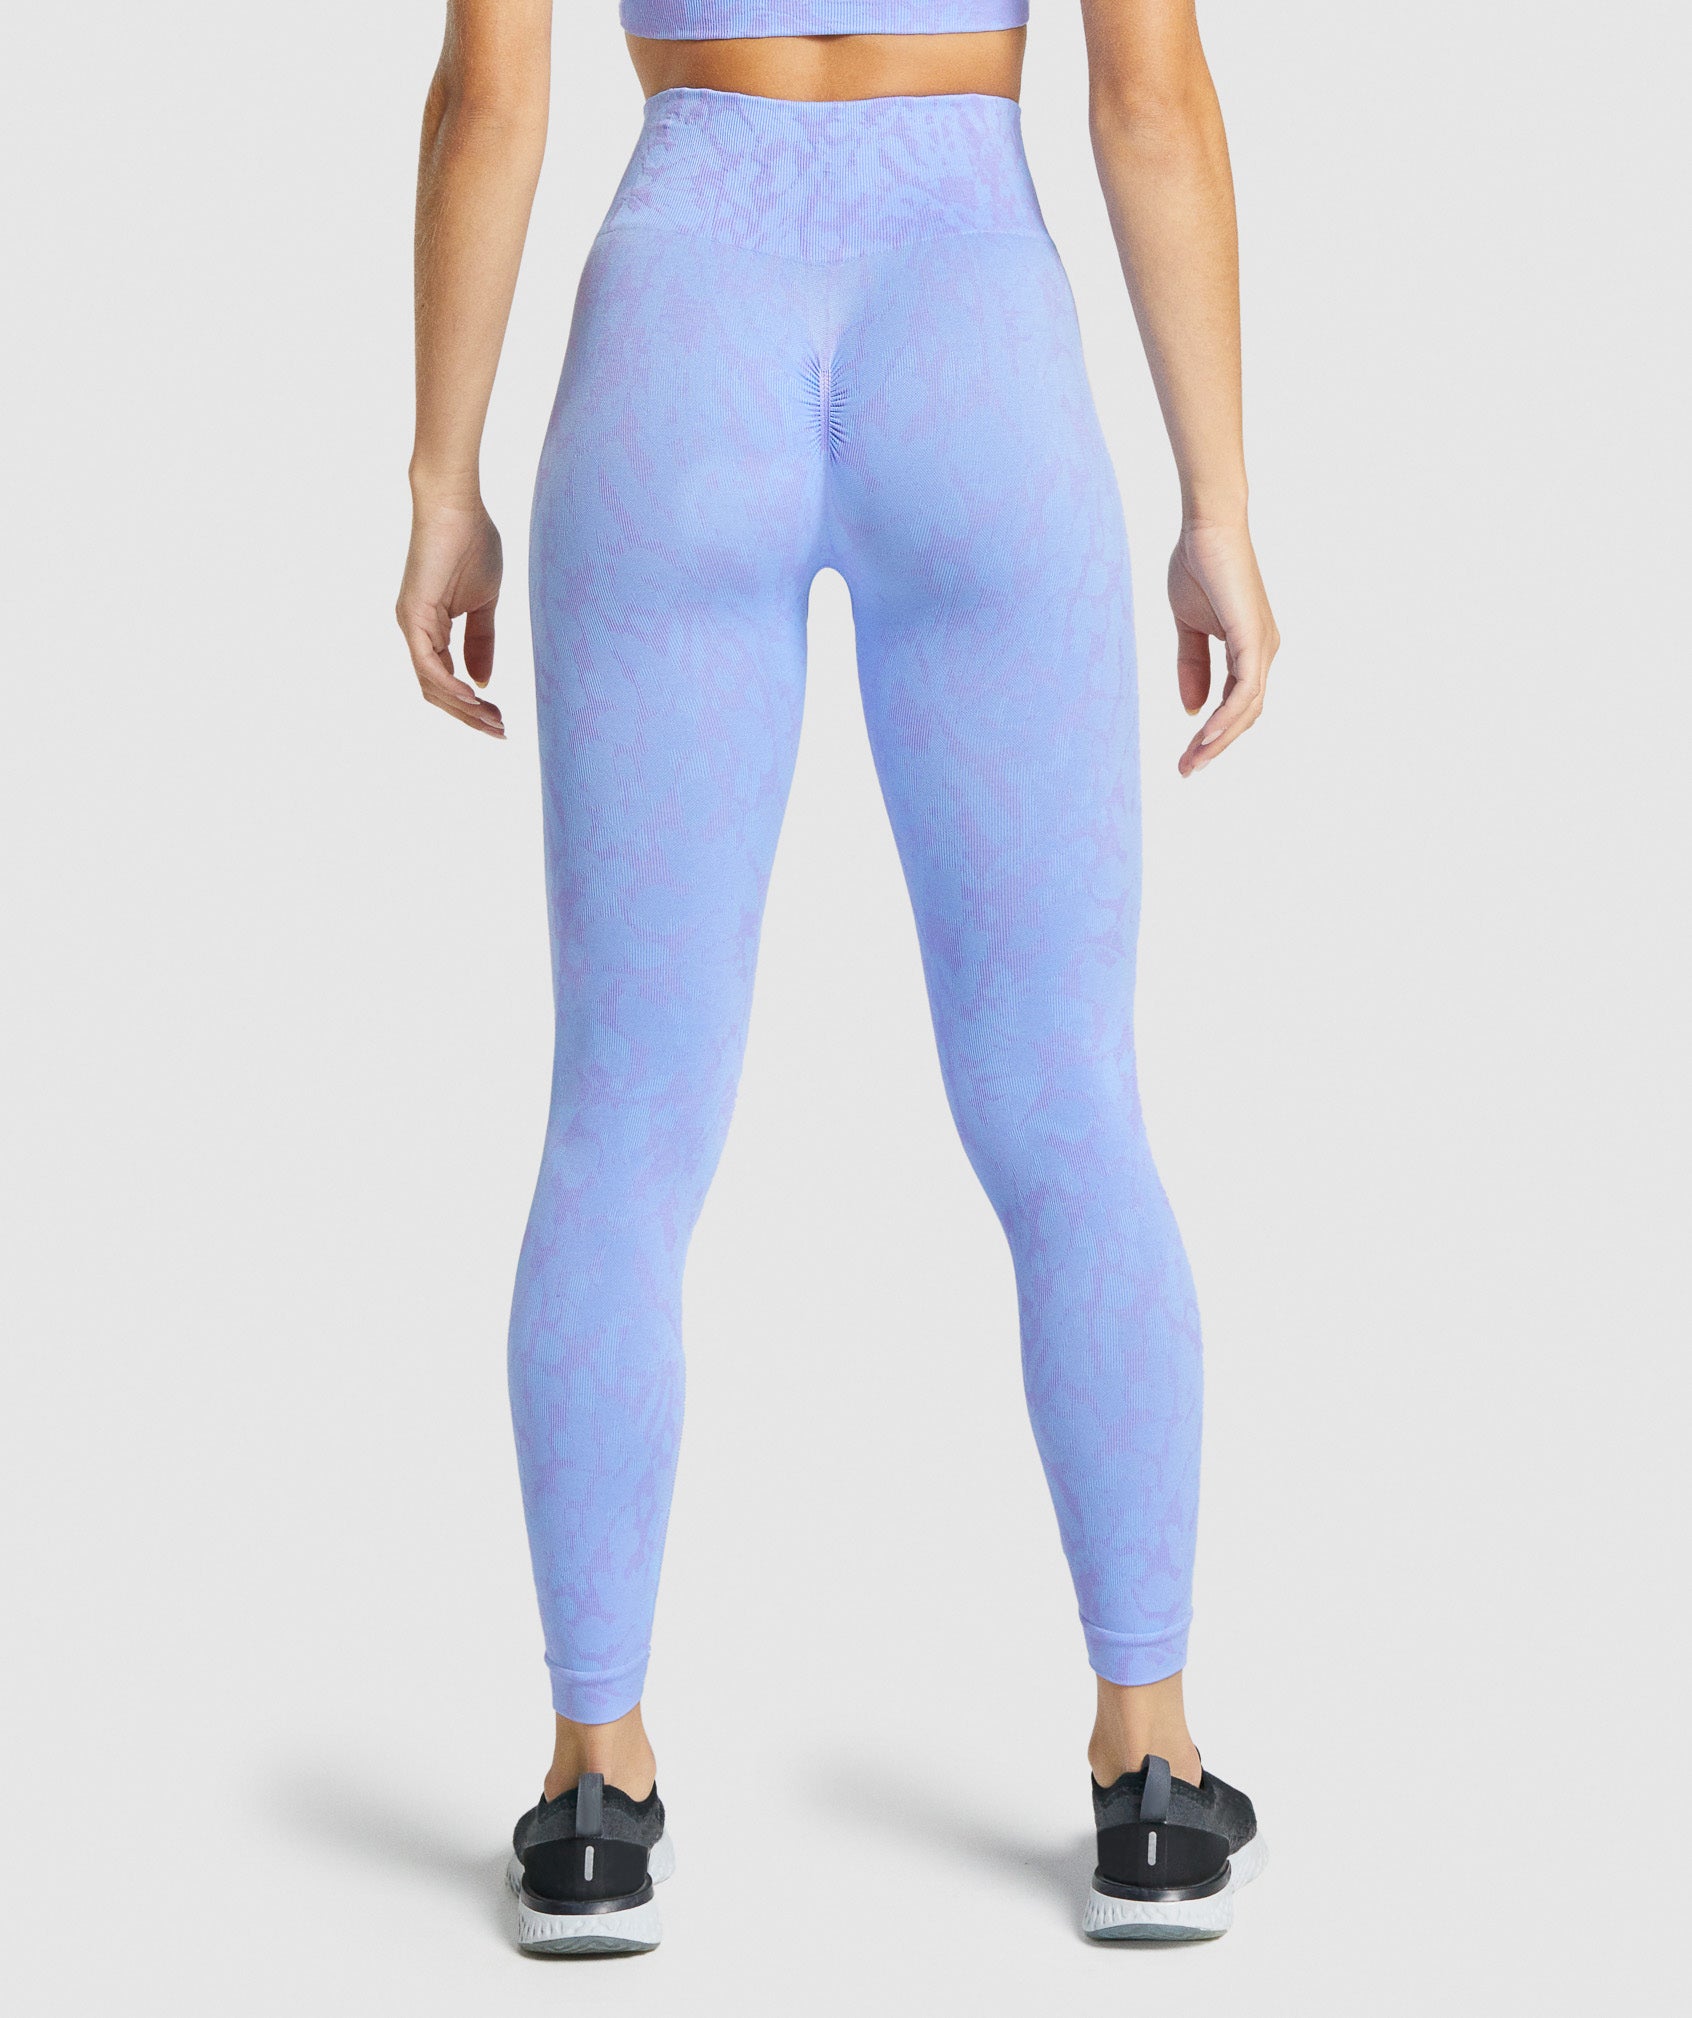 Adapt Animal Seamless Leggings in Butterfly | Light Blue - view 5